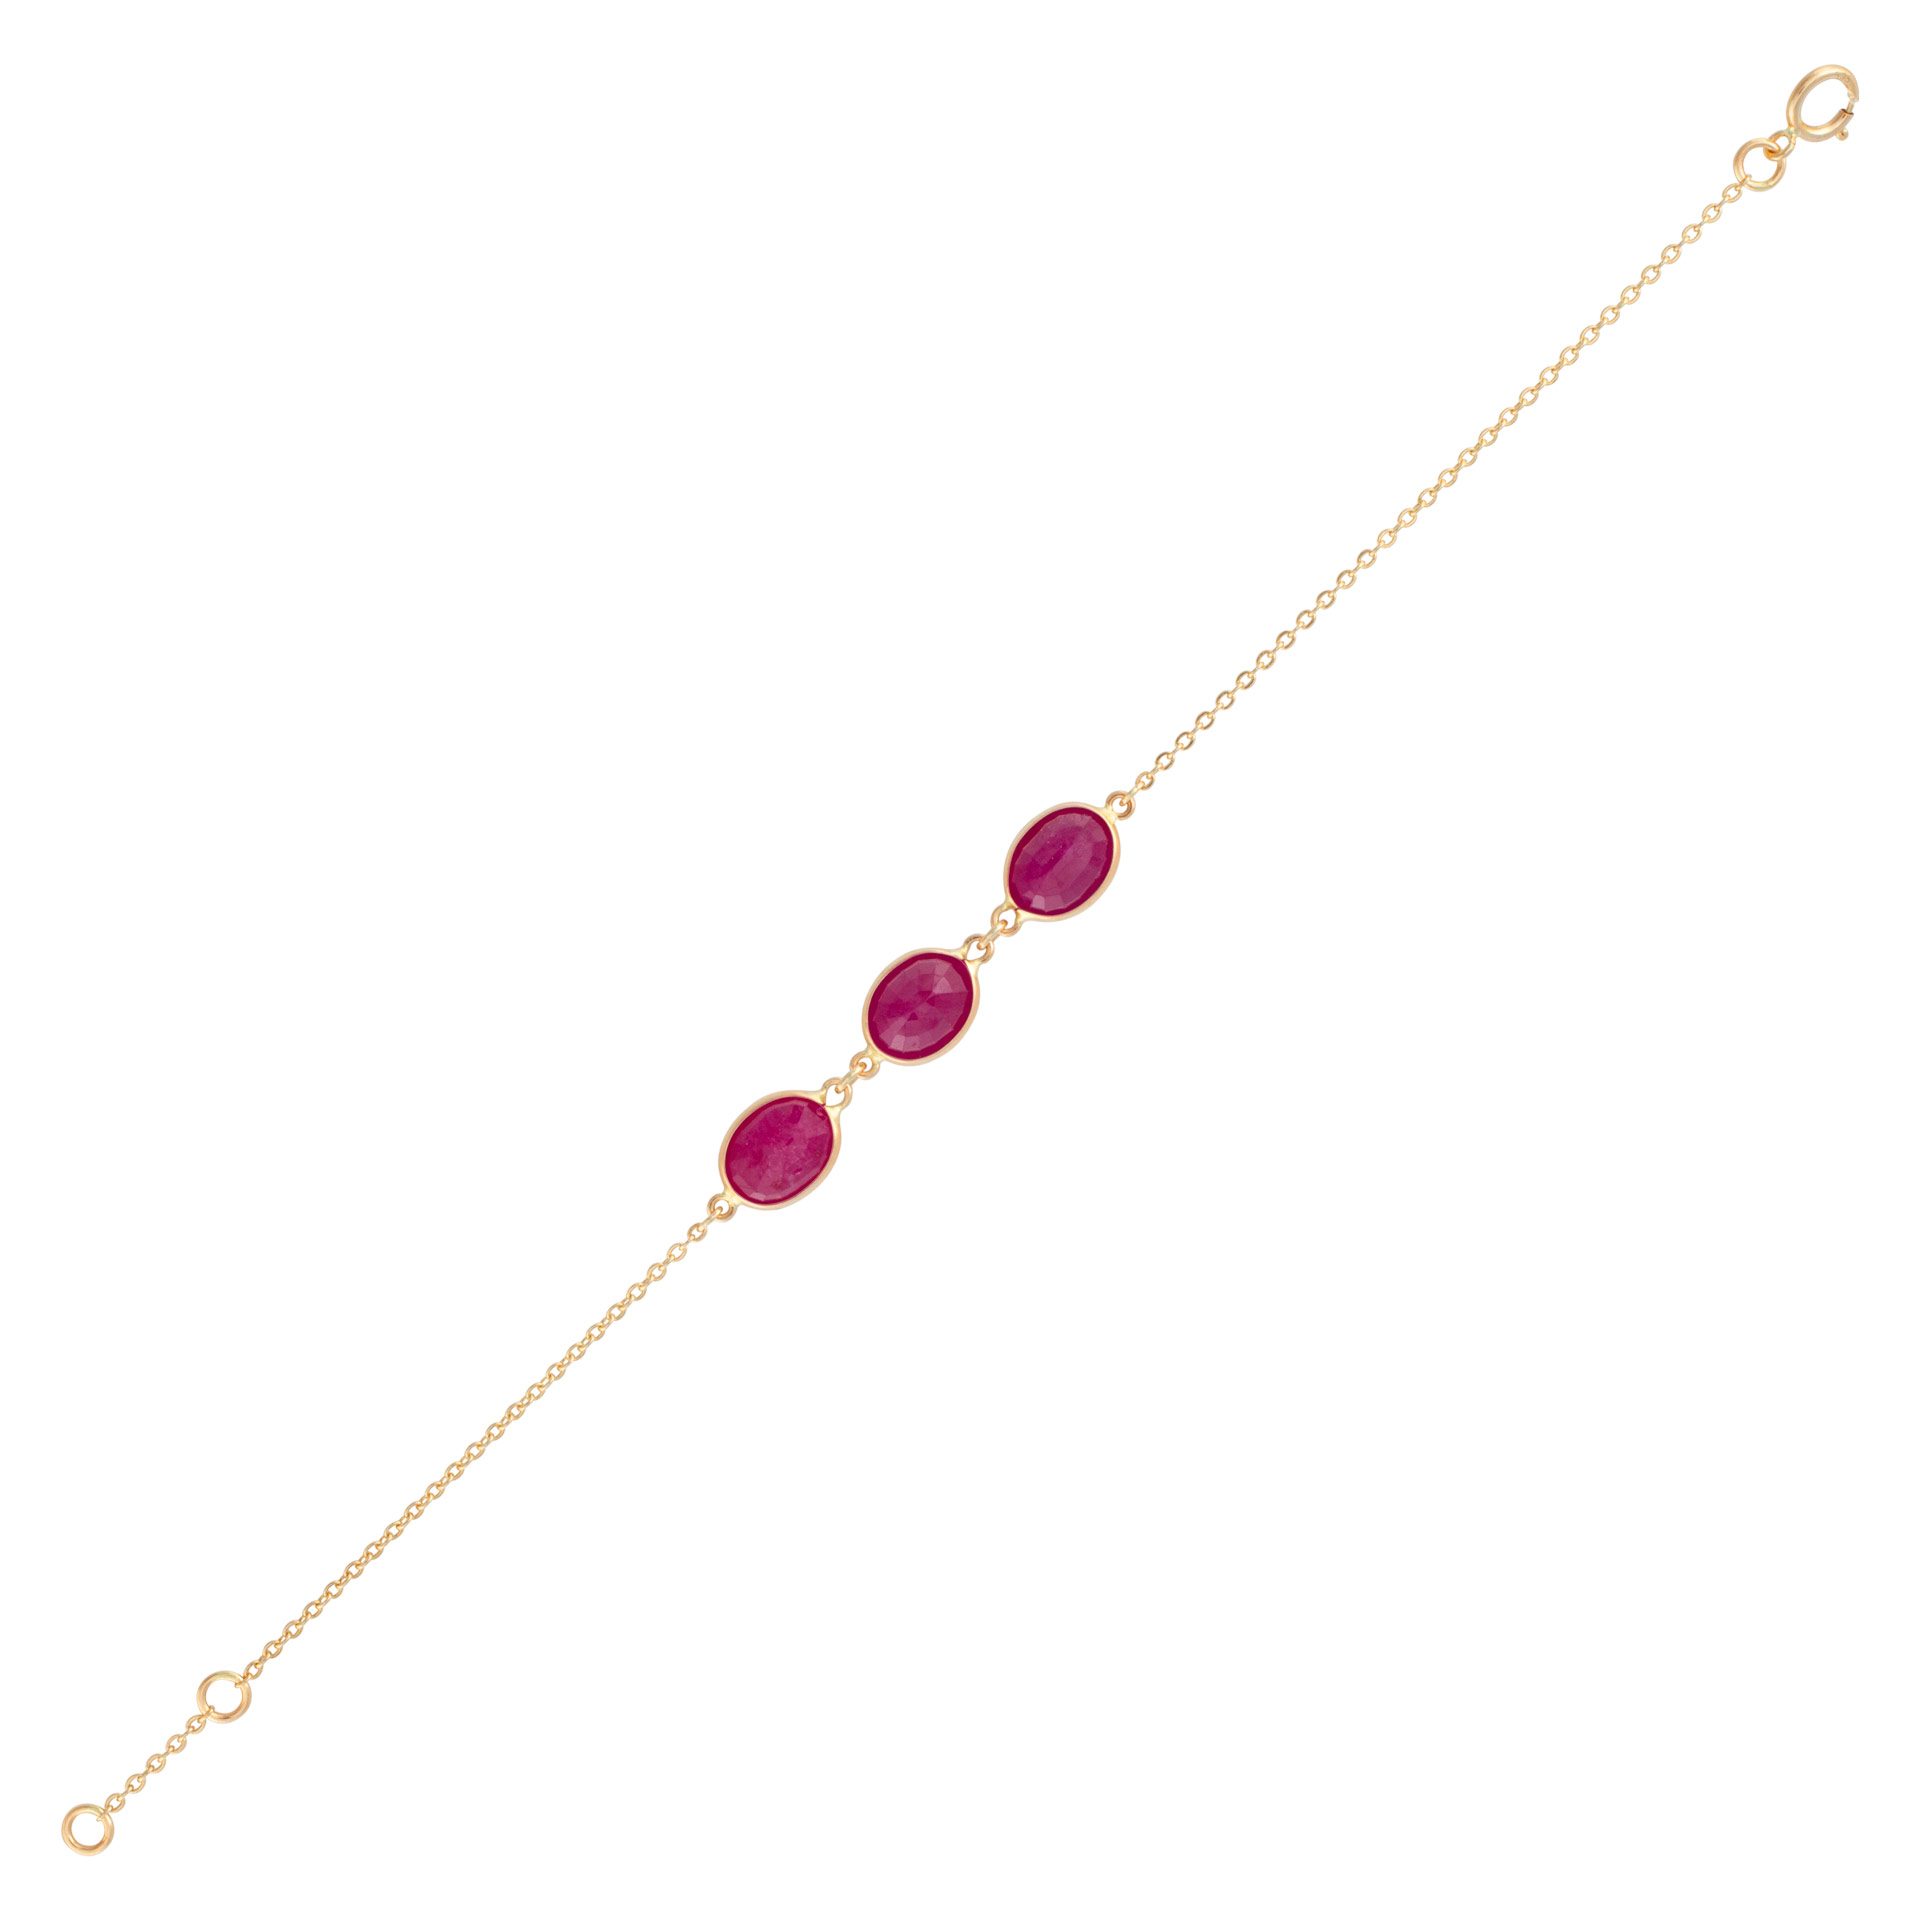 Classic chain bracelet in 14k gold with 3 oval cut rubies, (over 6 carats).